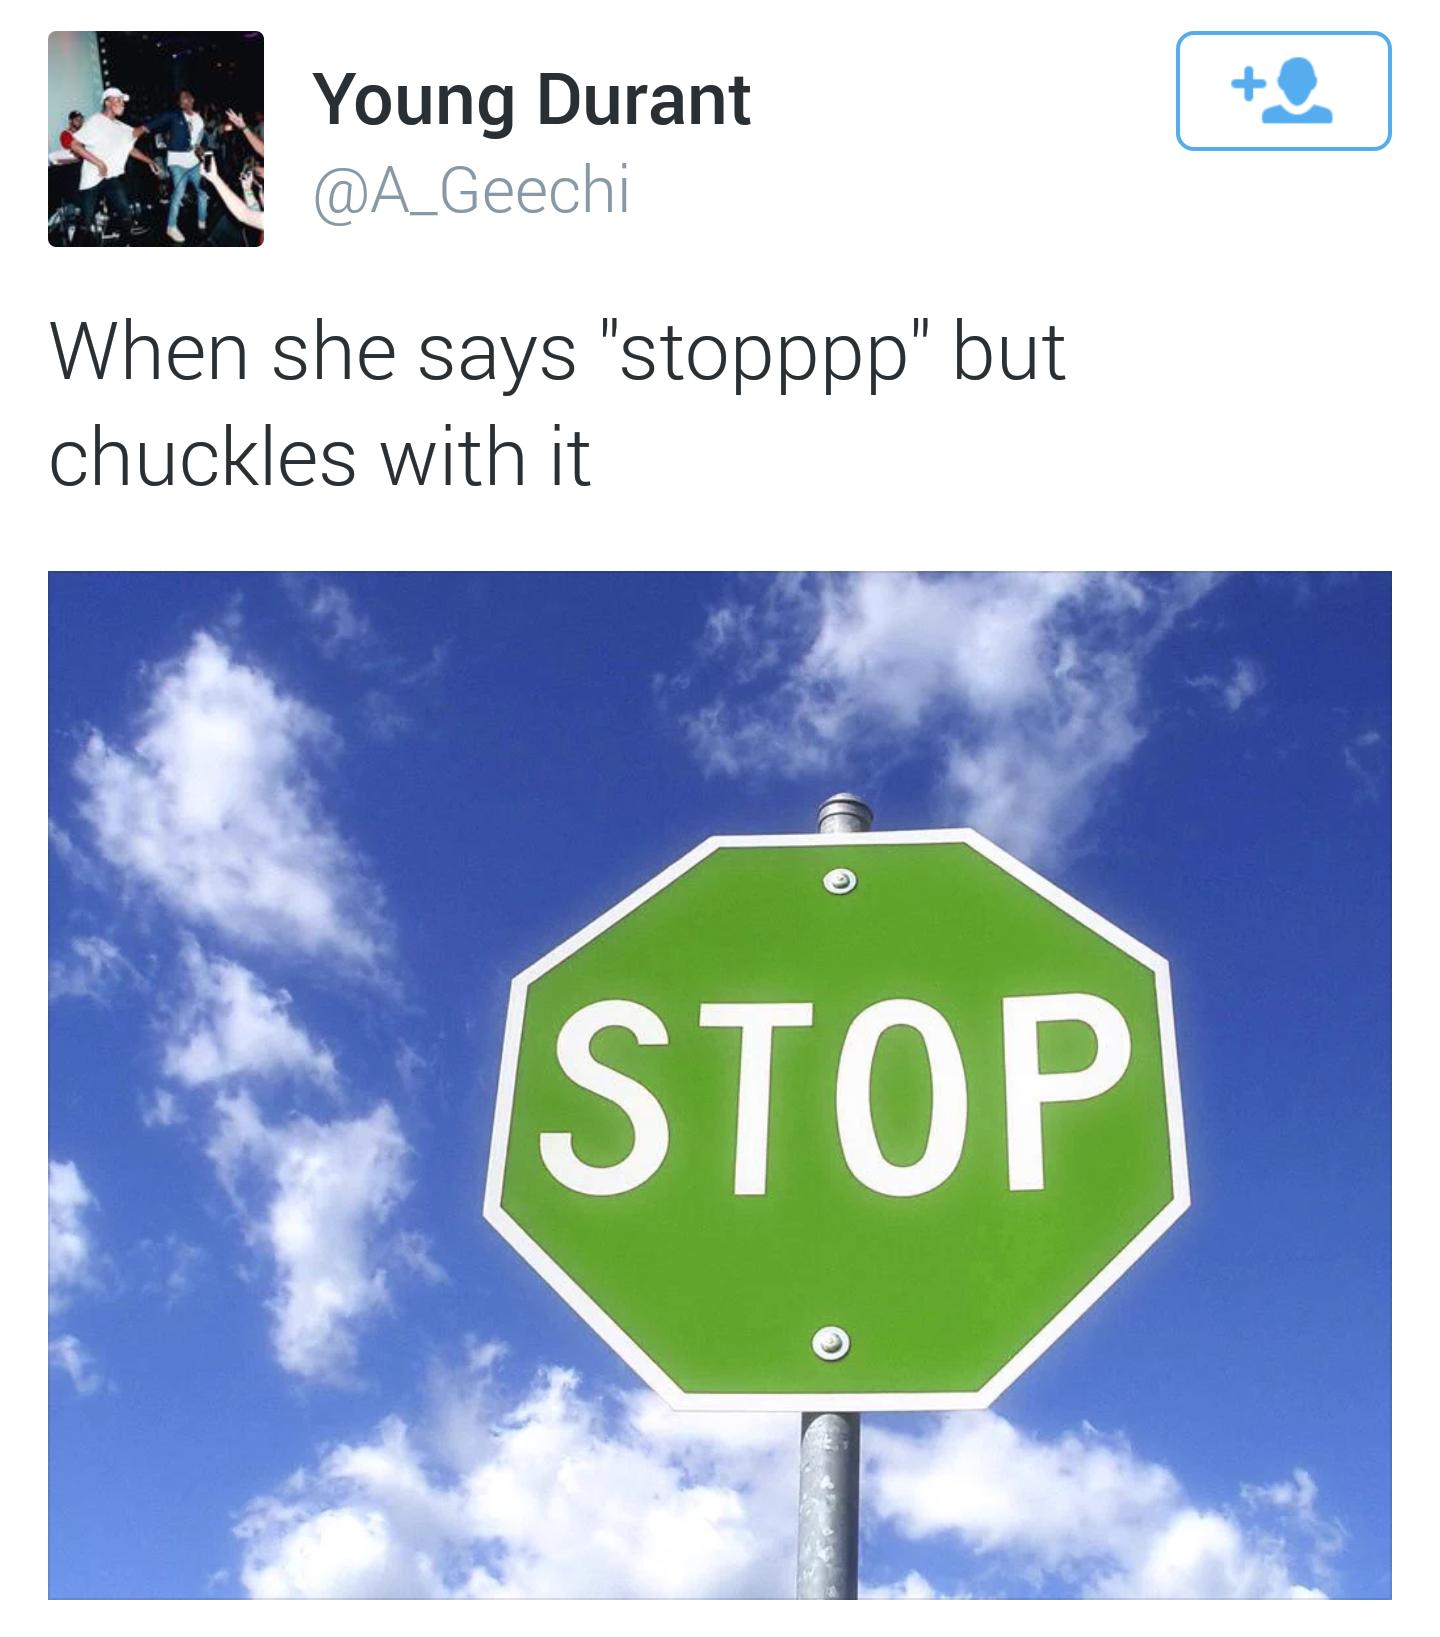 Dank meme of a bright green stop sign that represent when a girl says NO but is also smiling and laughing when she says it.